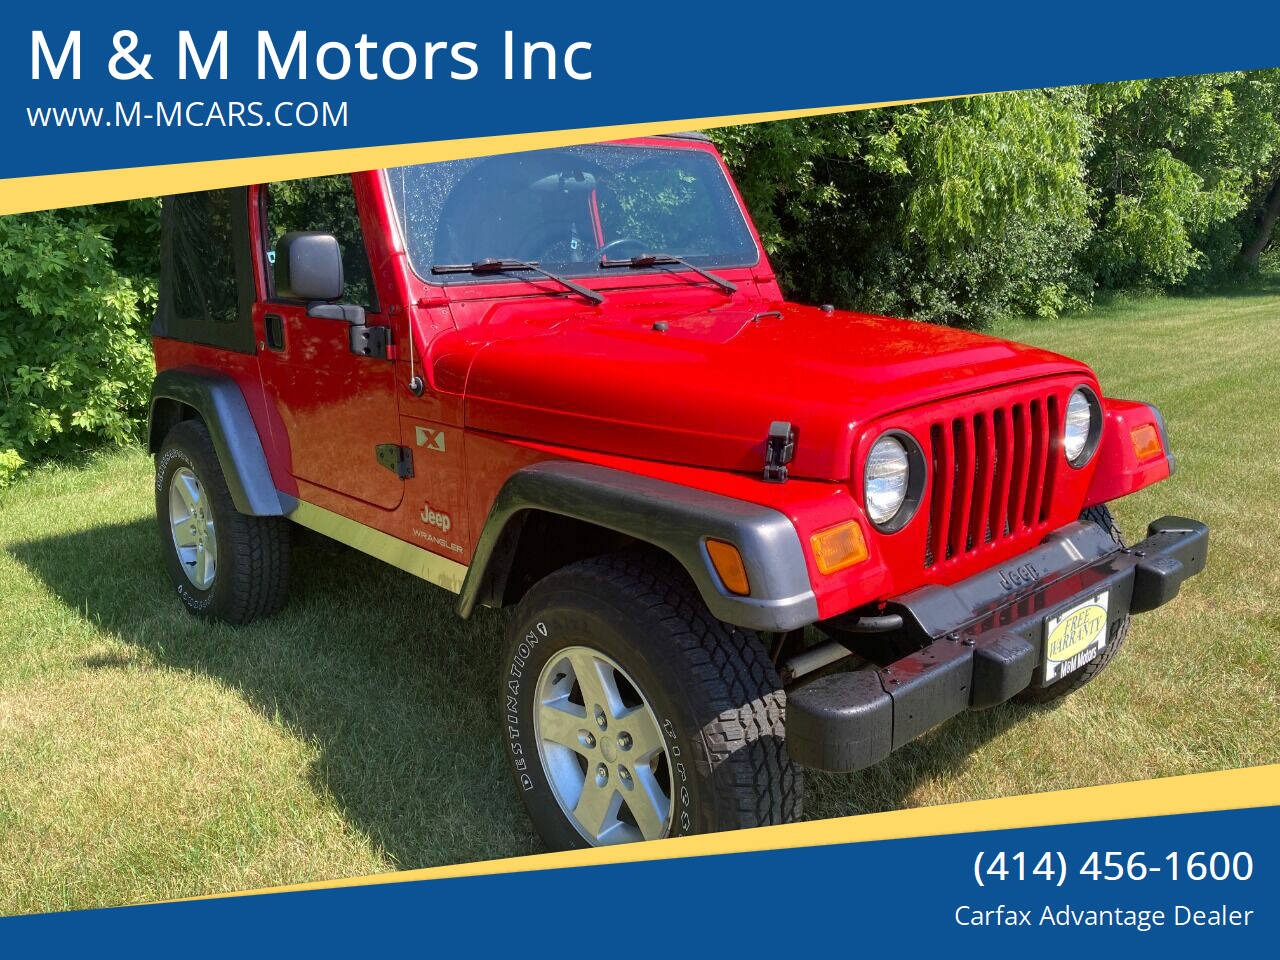 2003 Jeep Wrangler For Sale In Milwaukee, WI ®